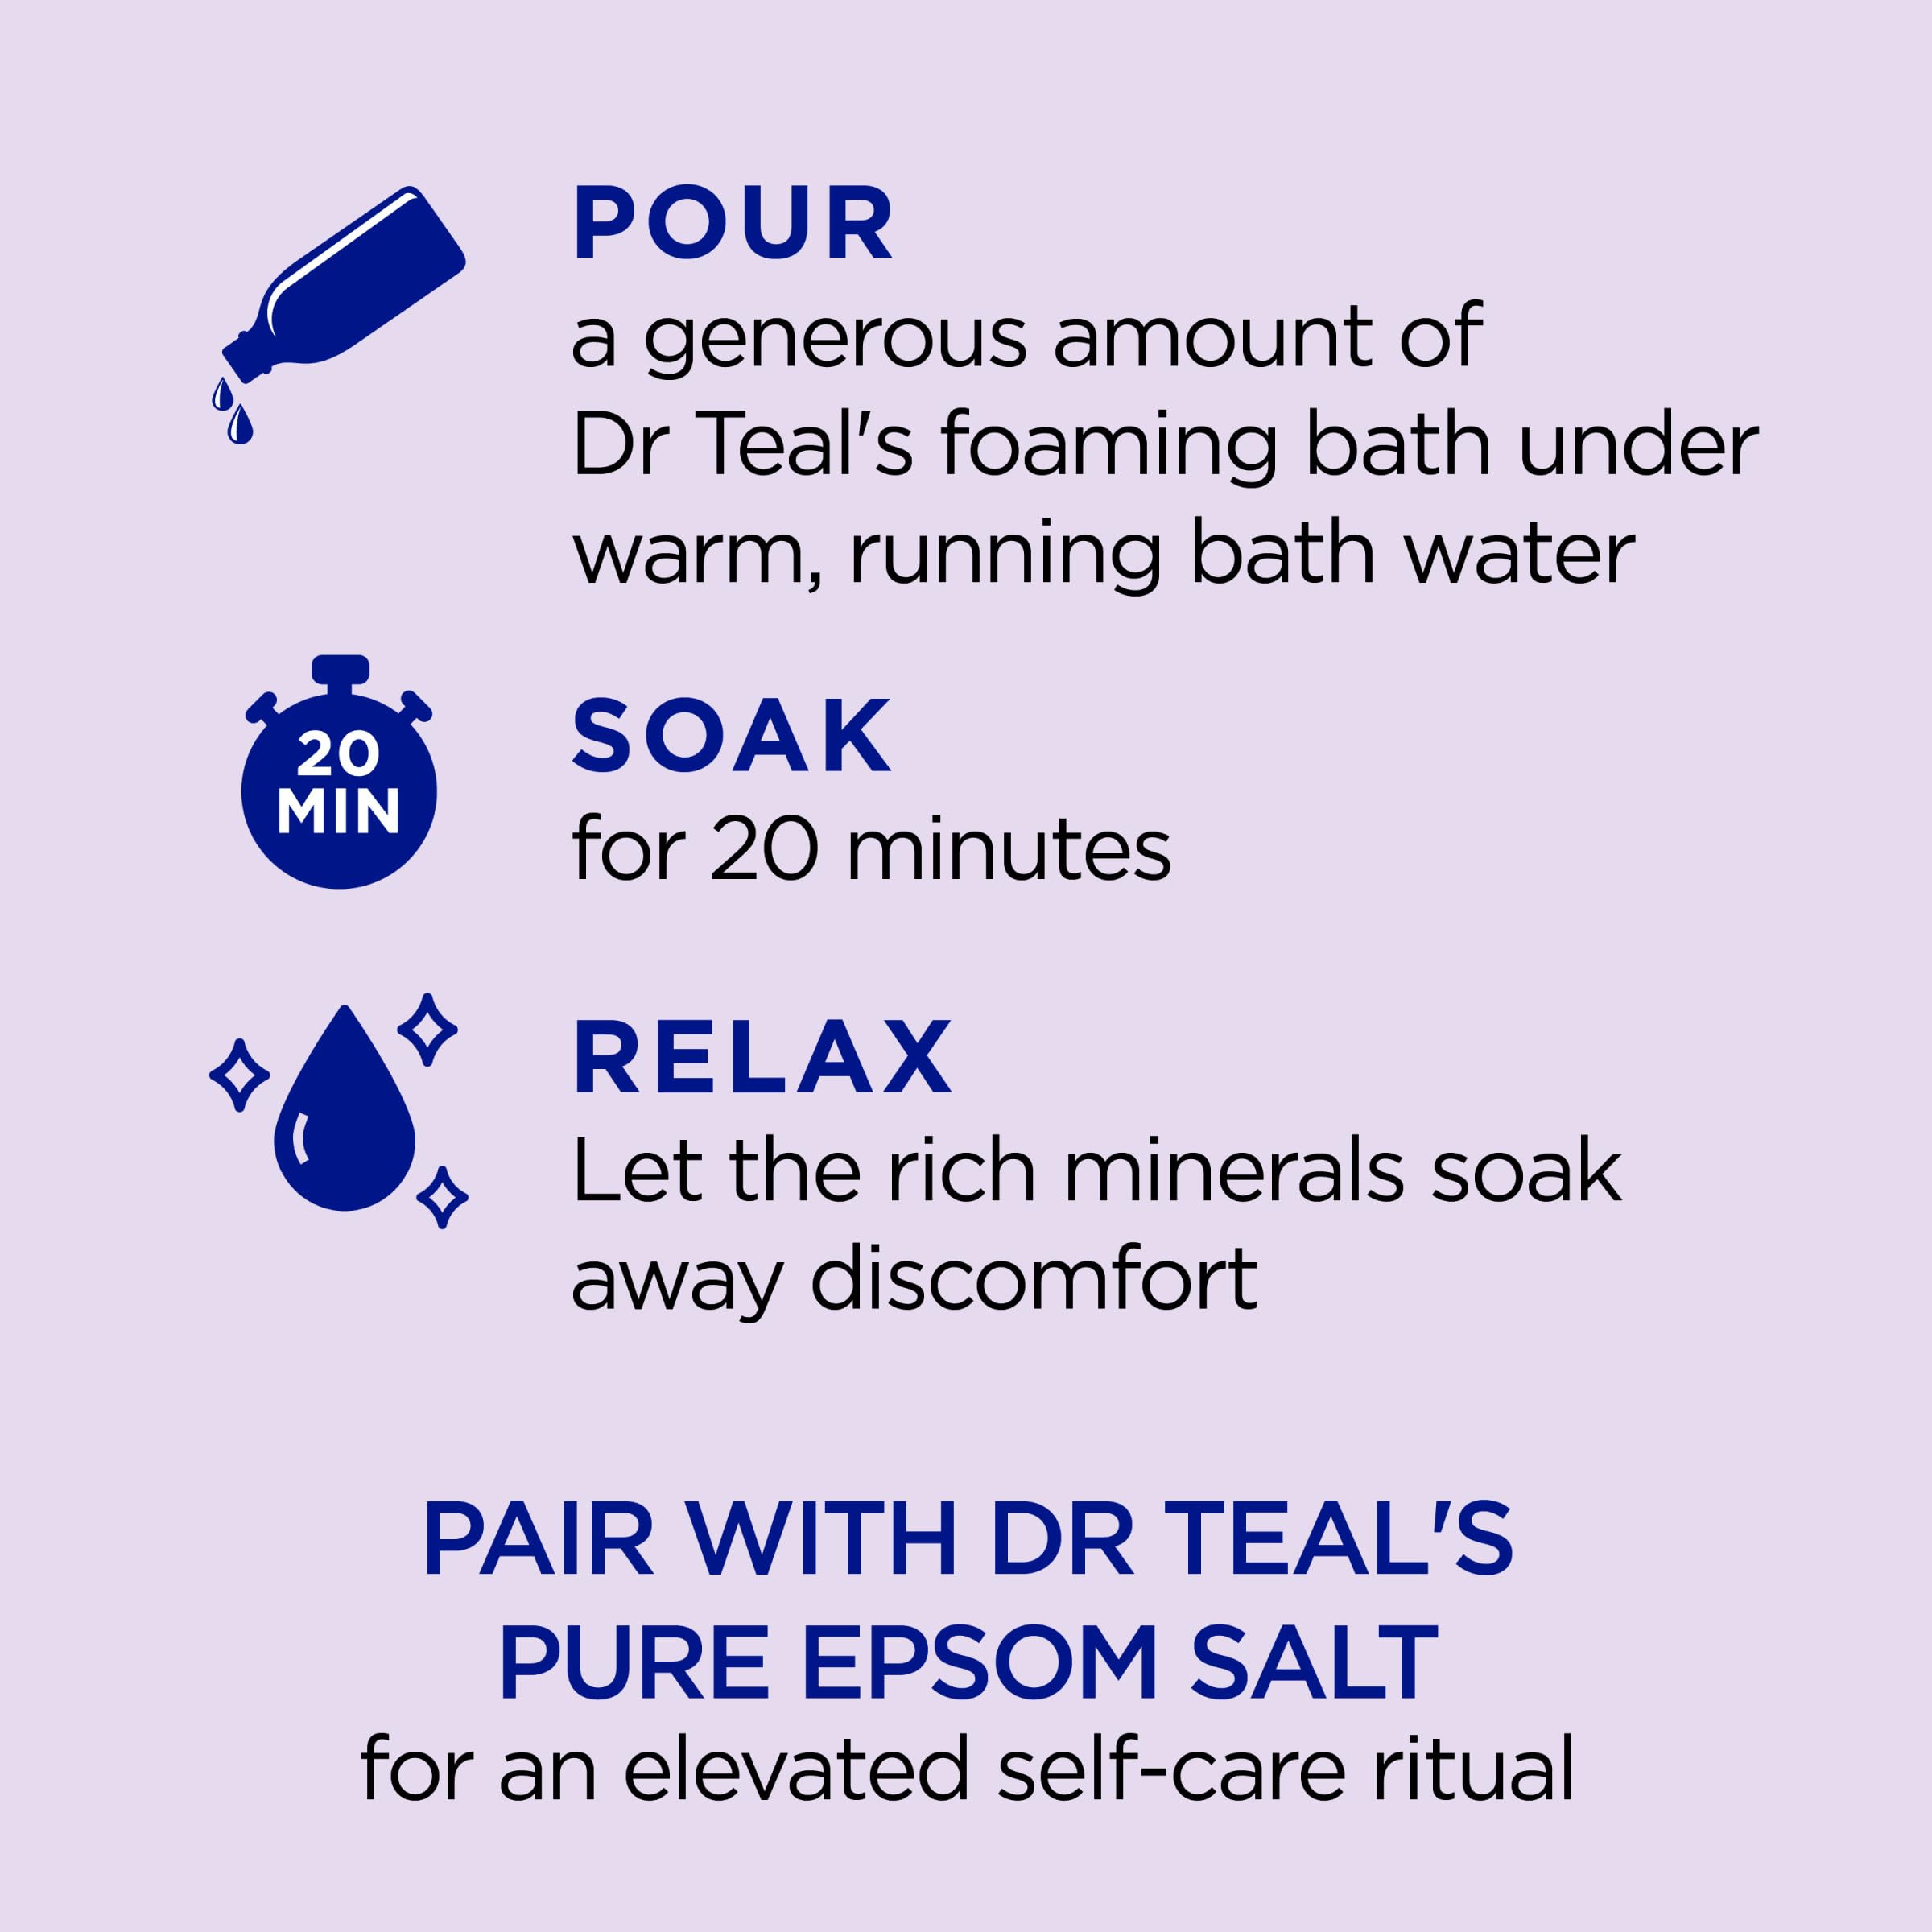 Dr Teal's Foaming Bath with Pure Epsom Salt, Soothe & Sleep with Lavender, 34 fl oz (Pack of 2)